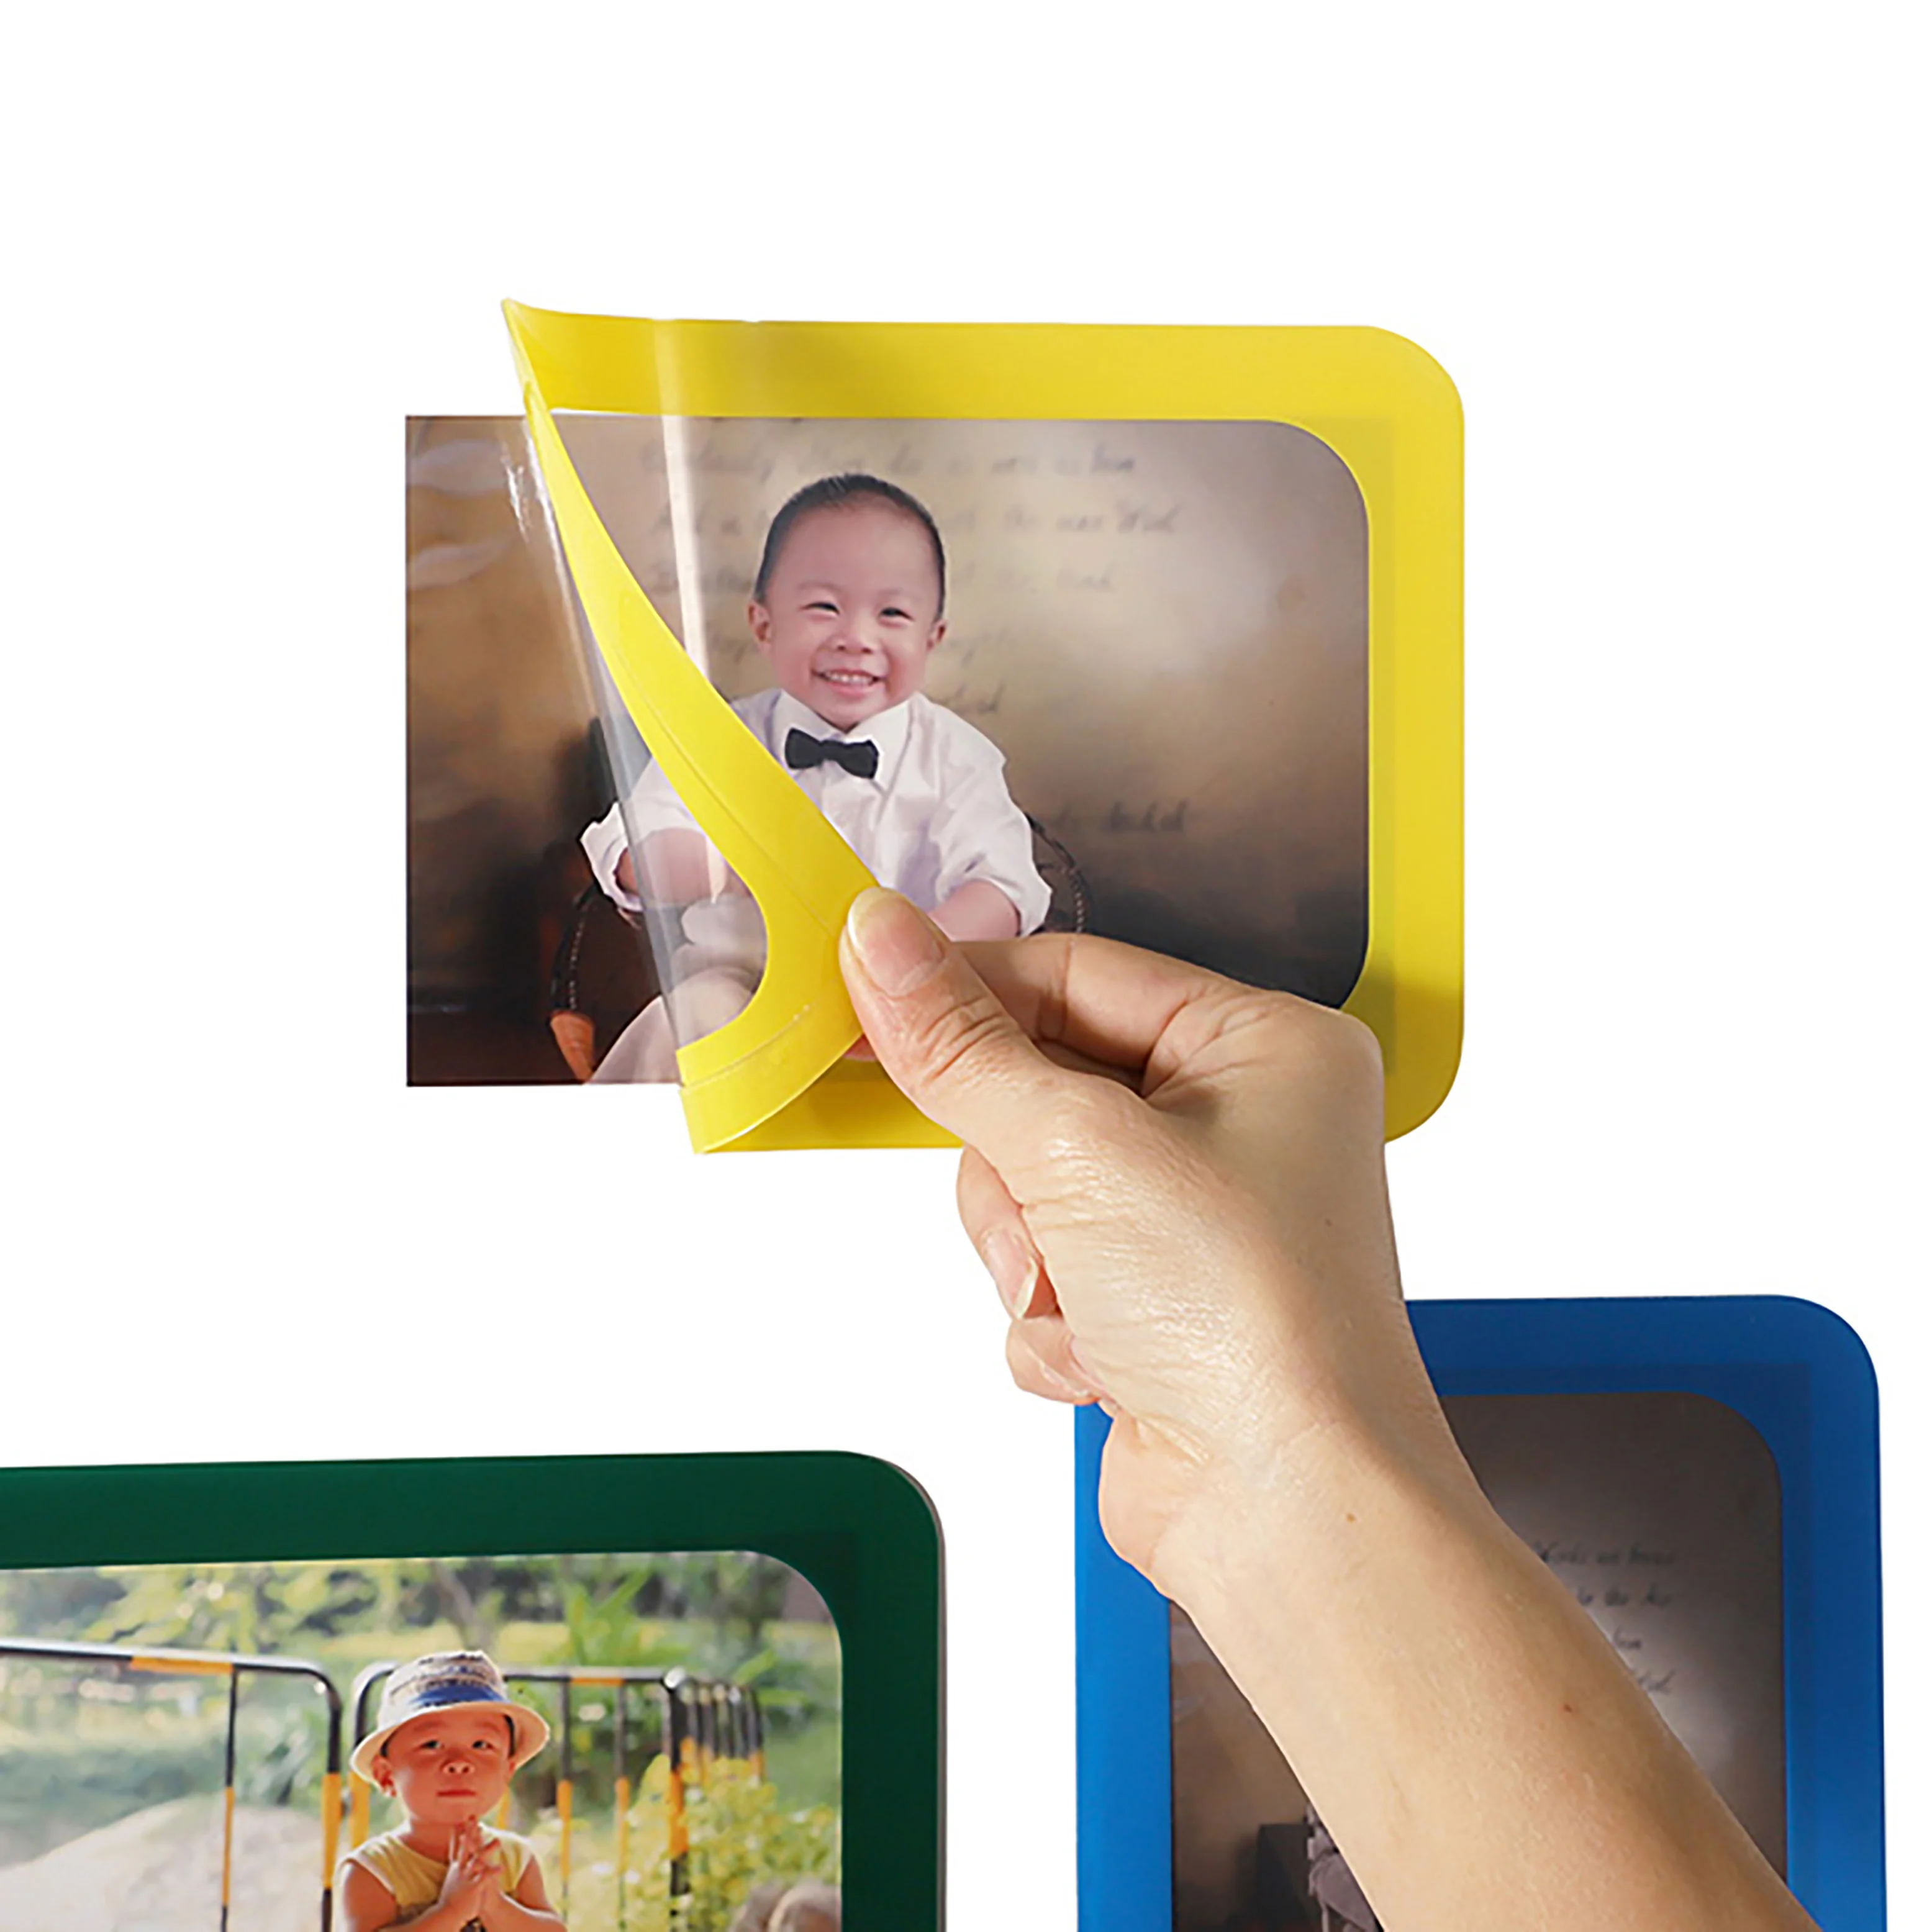 UCI New Arrival 2021 Reusable Sticky Photo Frame 4 x 6 inch Removable Photo Frame Cling to smooth glossy surface